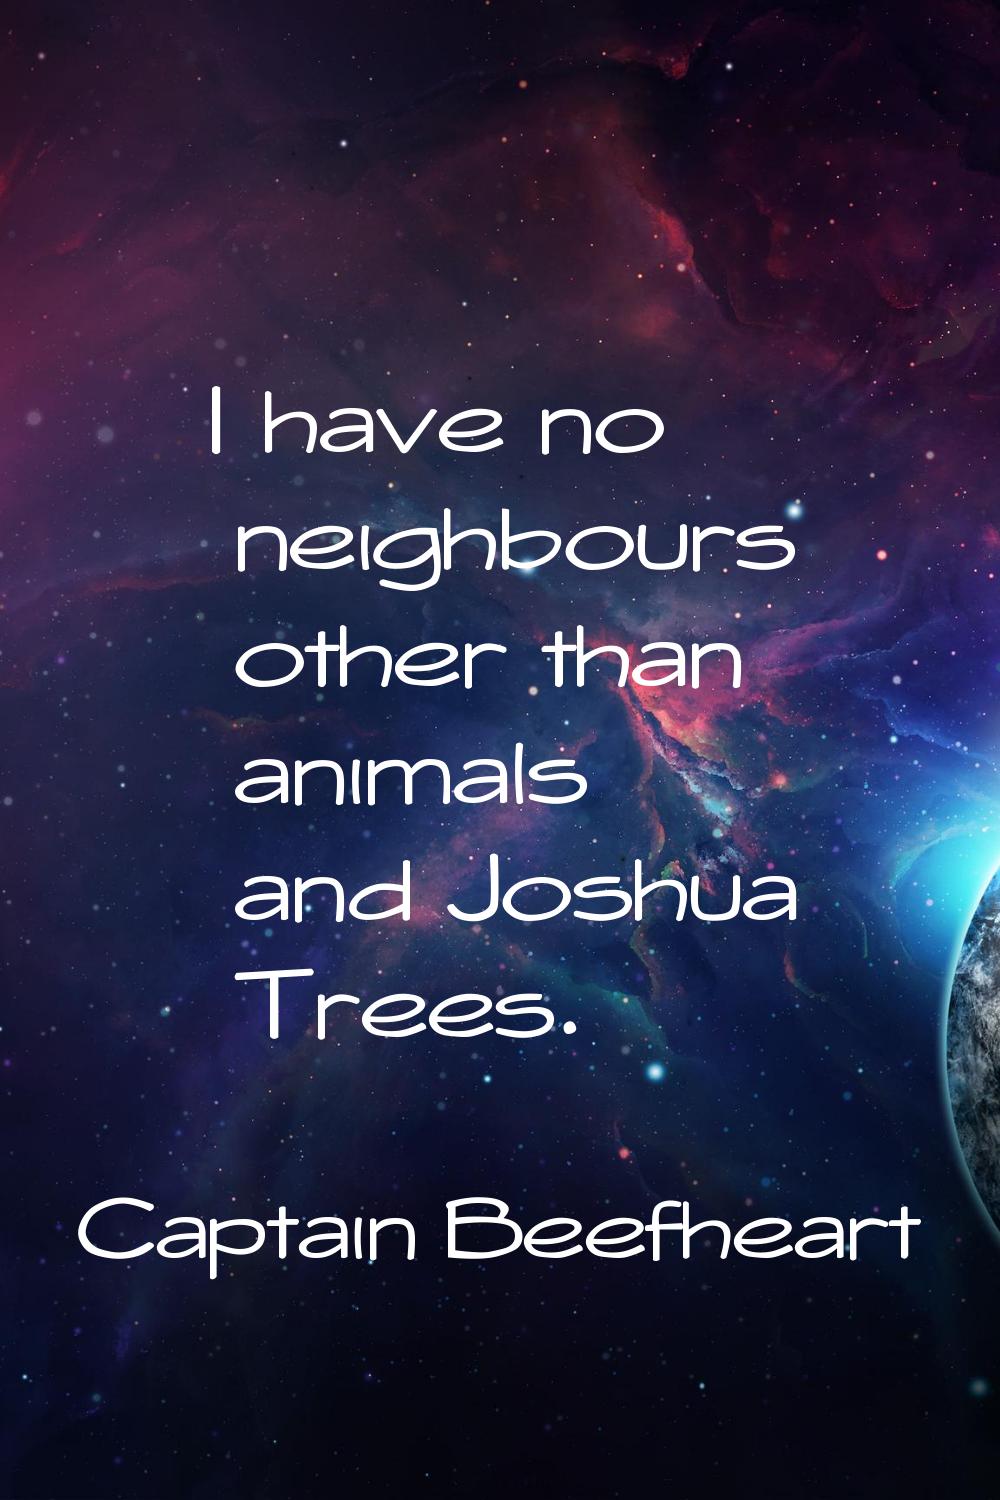 I have no neighbours other than animals and Joshua Trees.